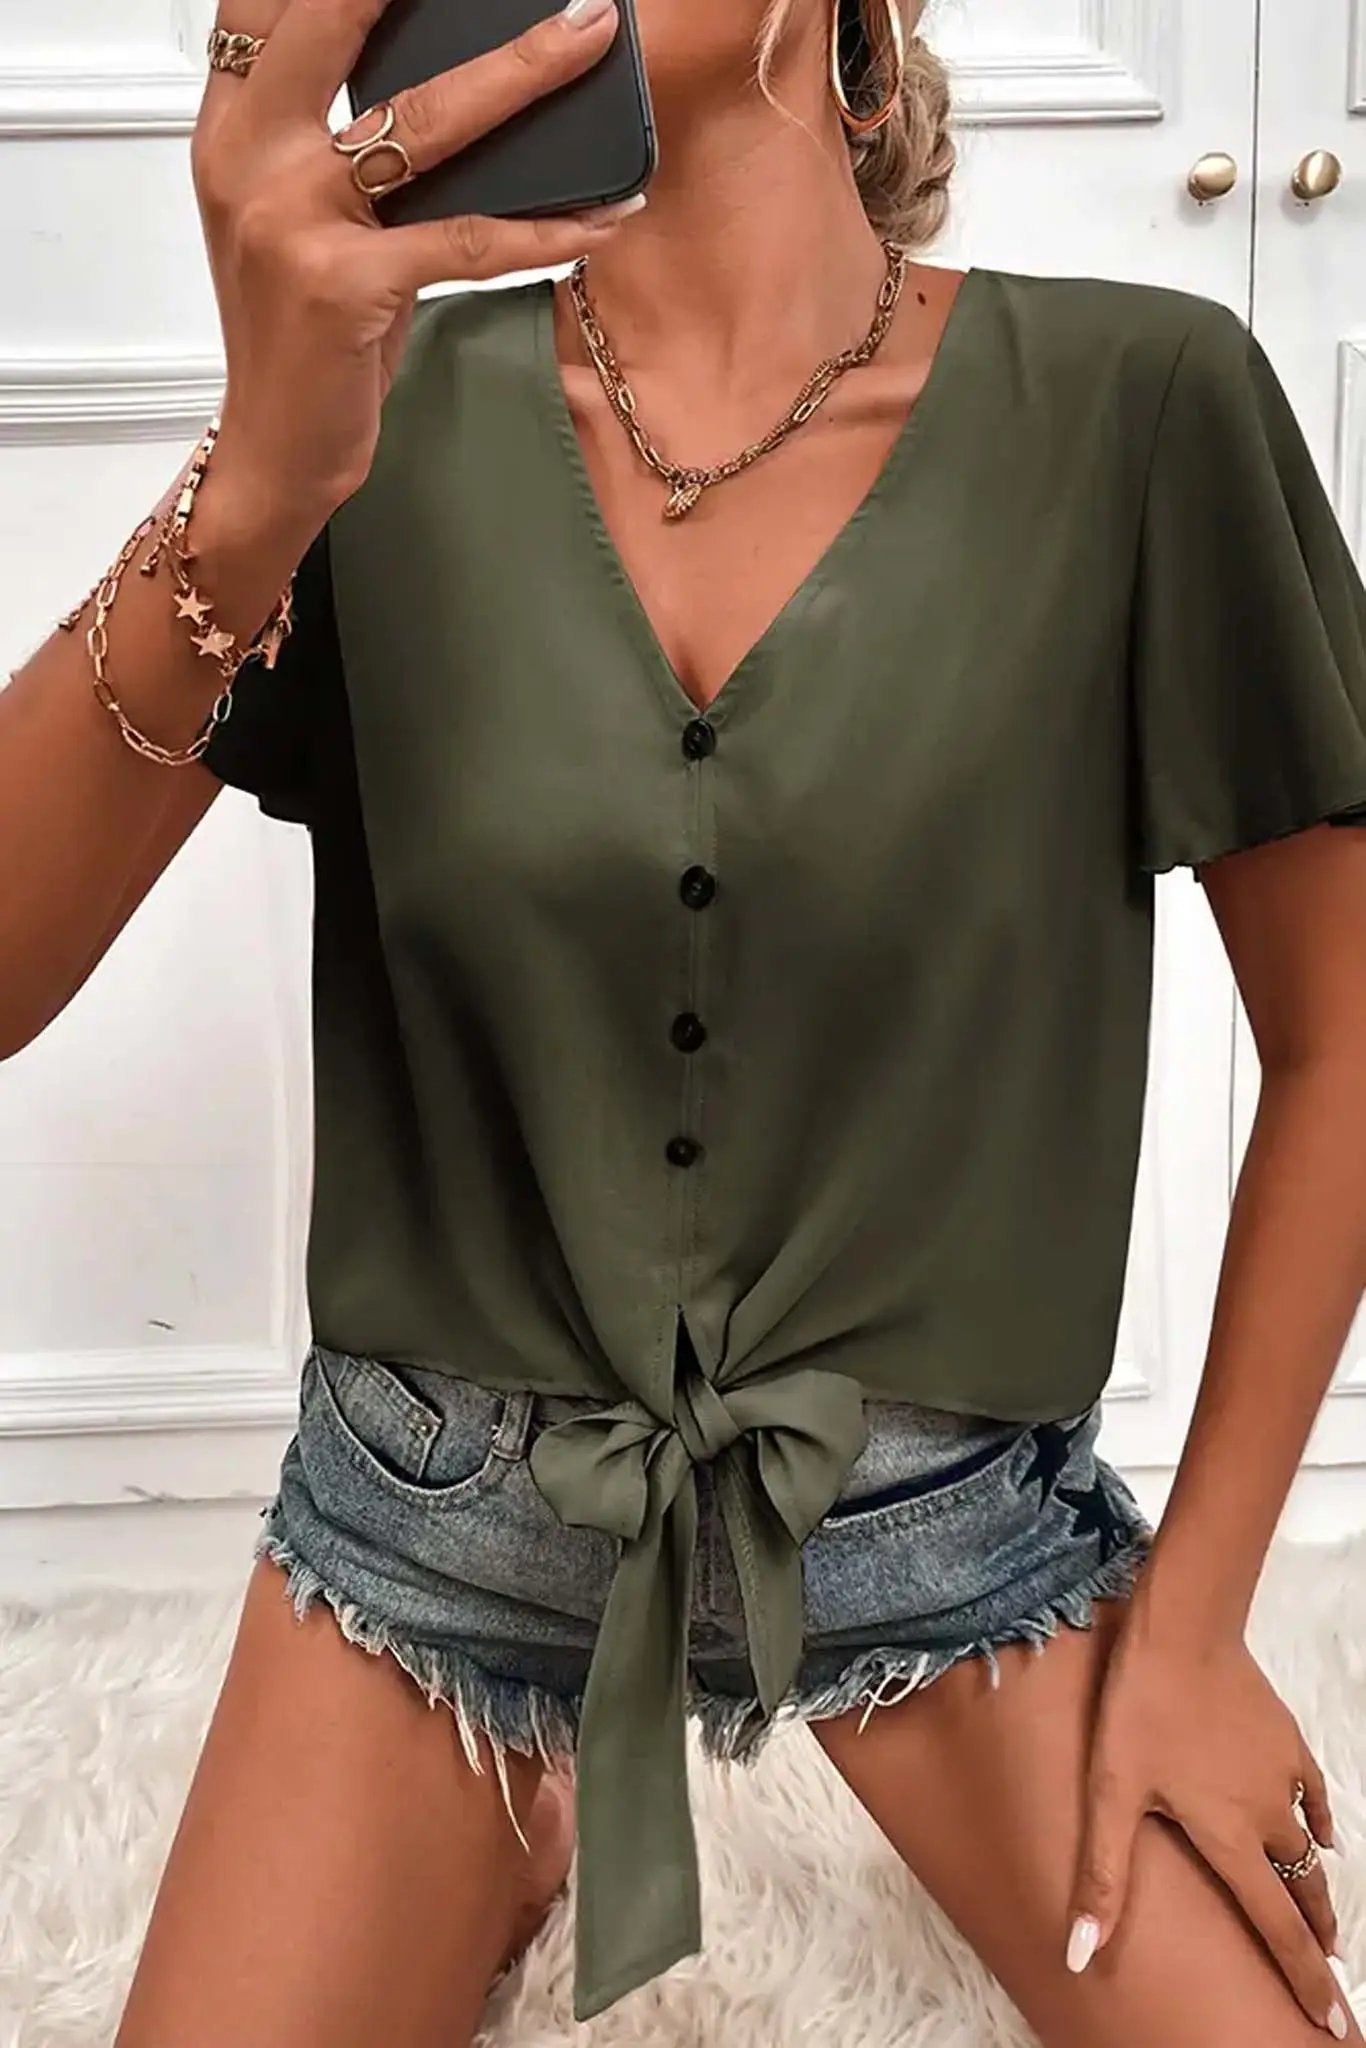 Woman wearing a green Don't Be Chy Boutique Button Down V Neck Front Tie Short Sleeves Top and denim shorts, accessorized with bracelets, taking a selfie. The visible background is white and fluffy.